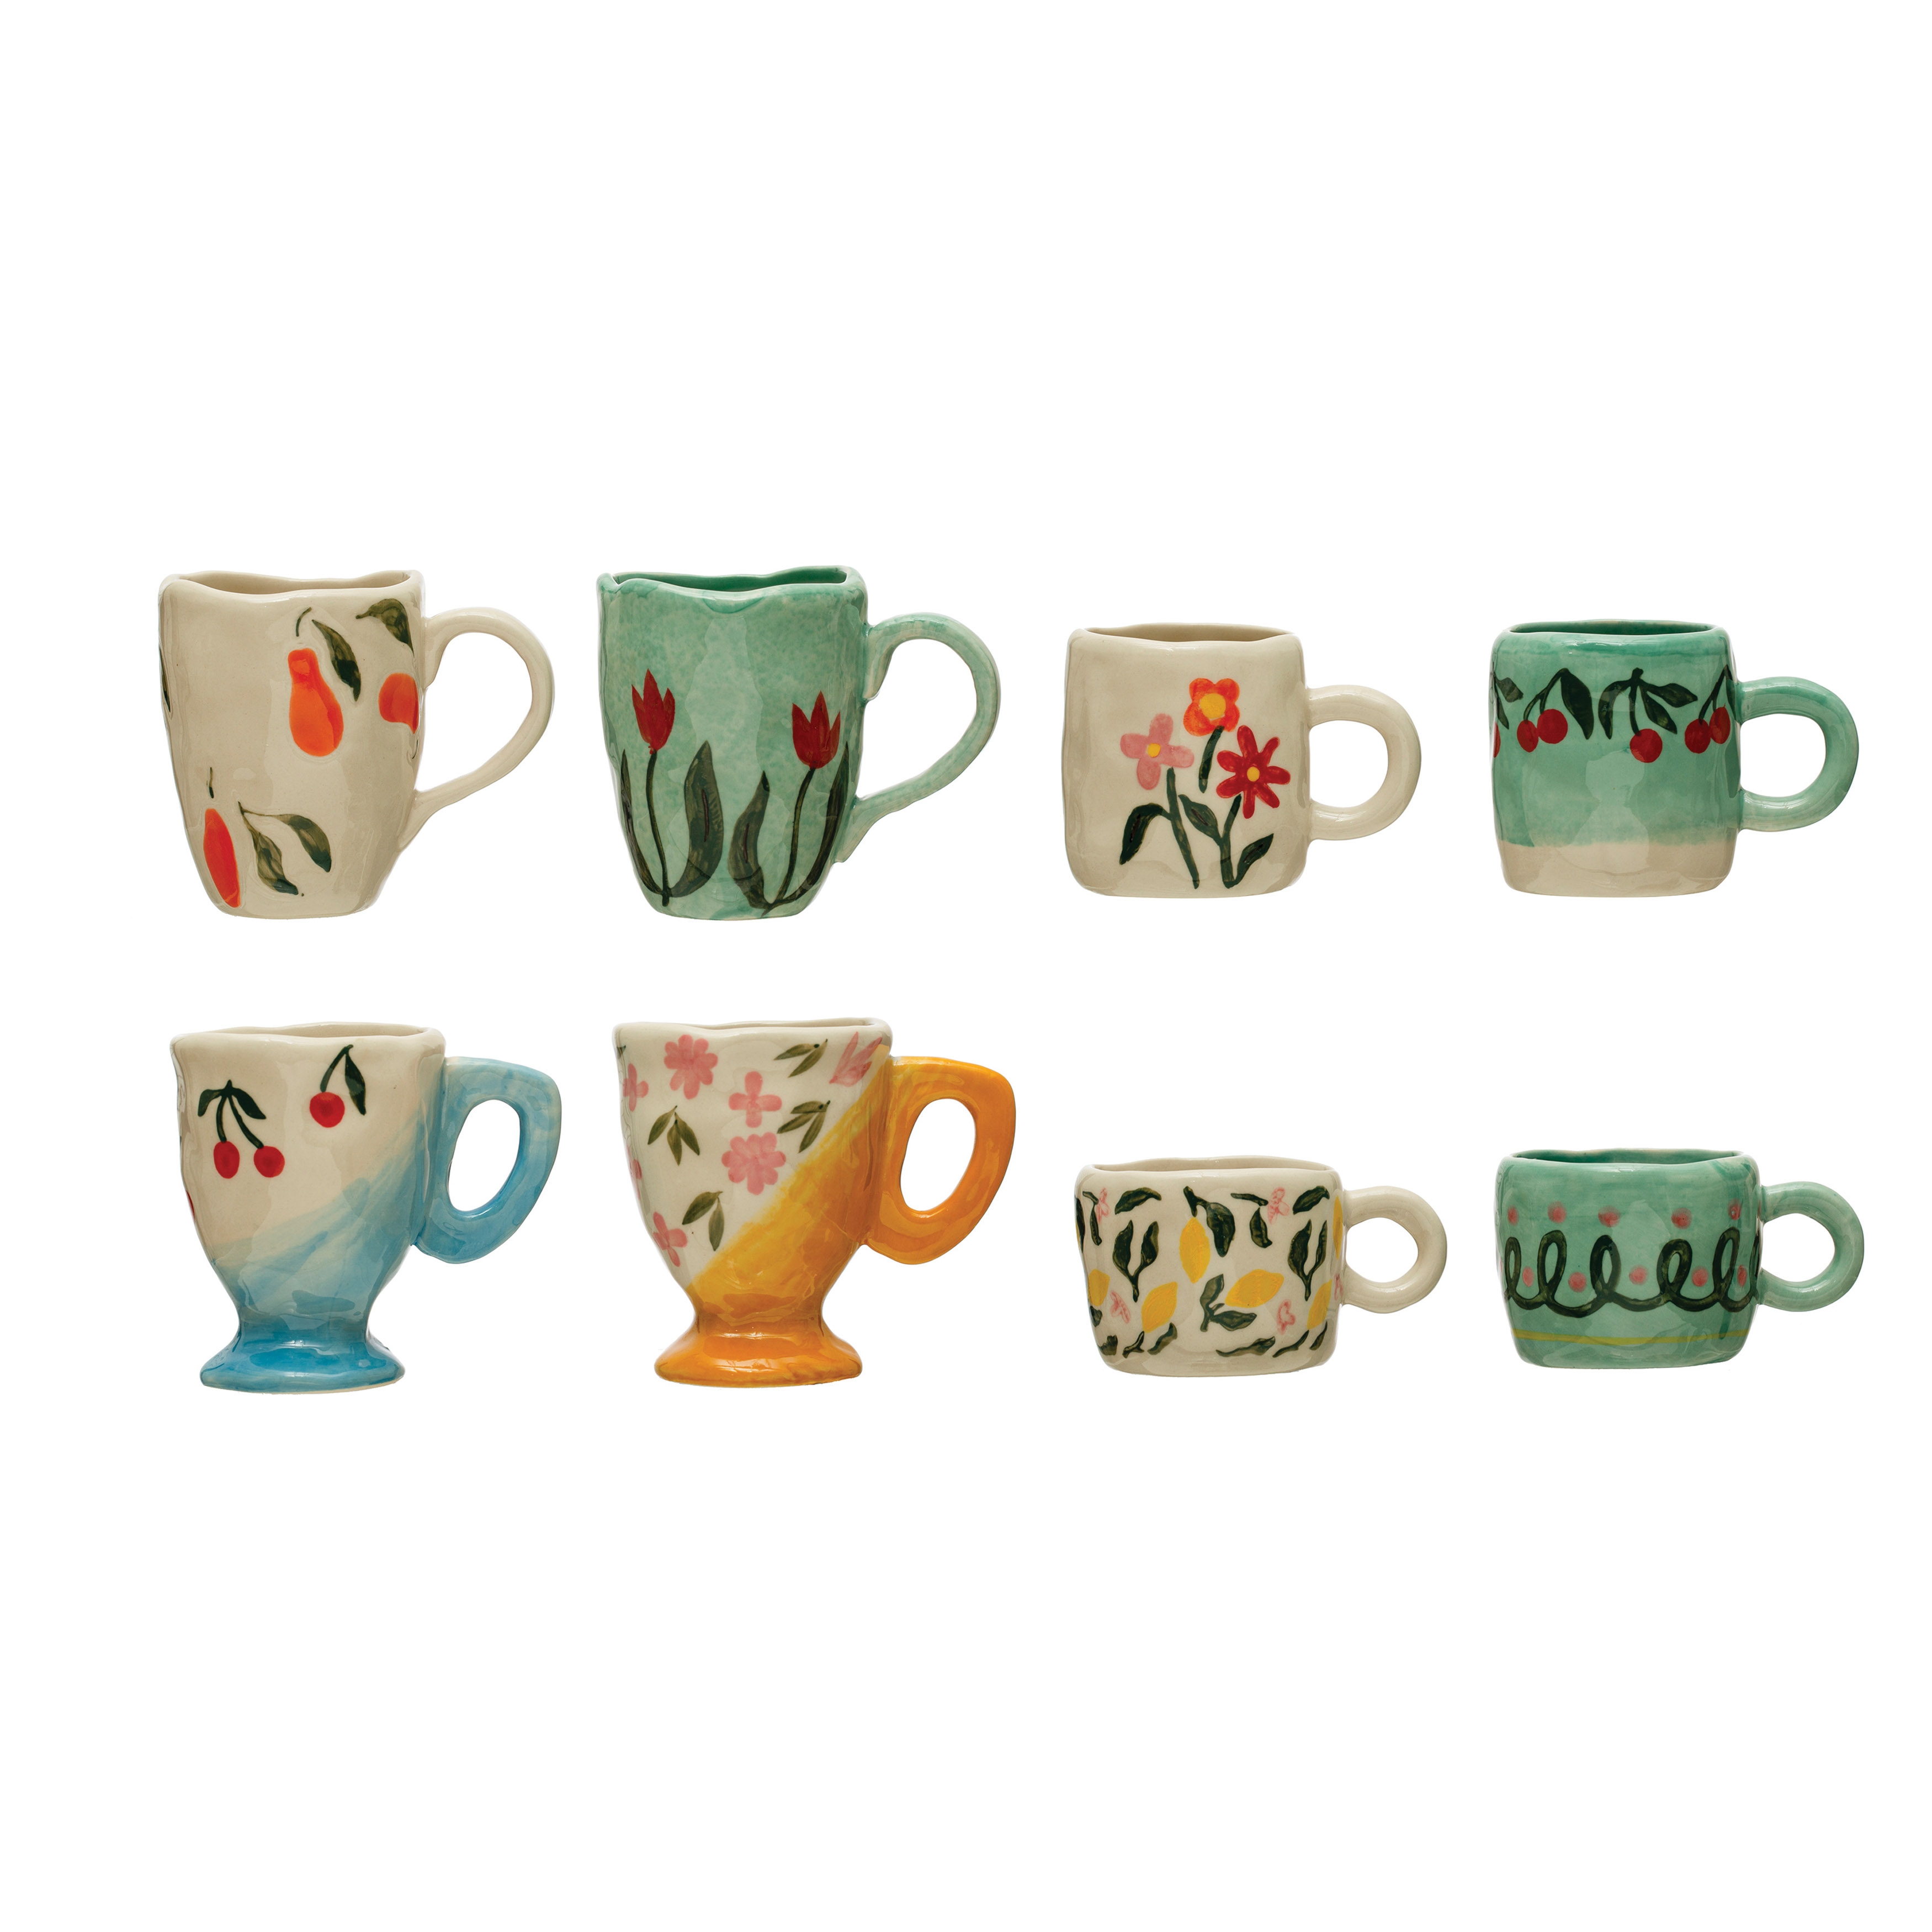 Stoneware Espresso Cups with Painted Designs, Set of 8, Multicolor - Image 0